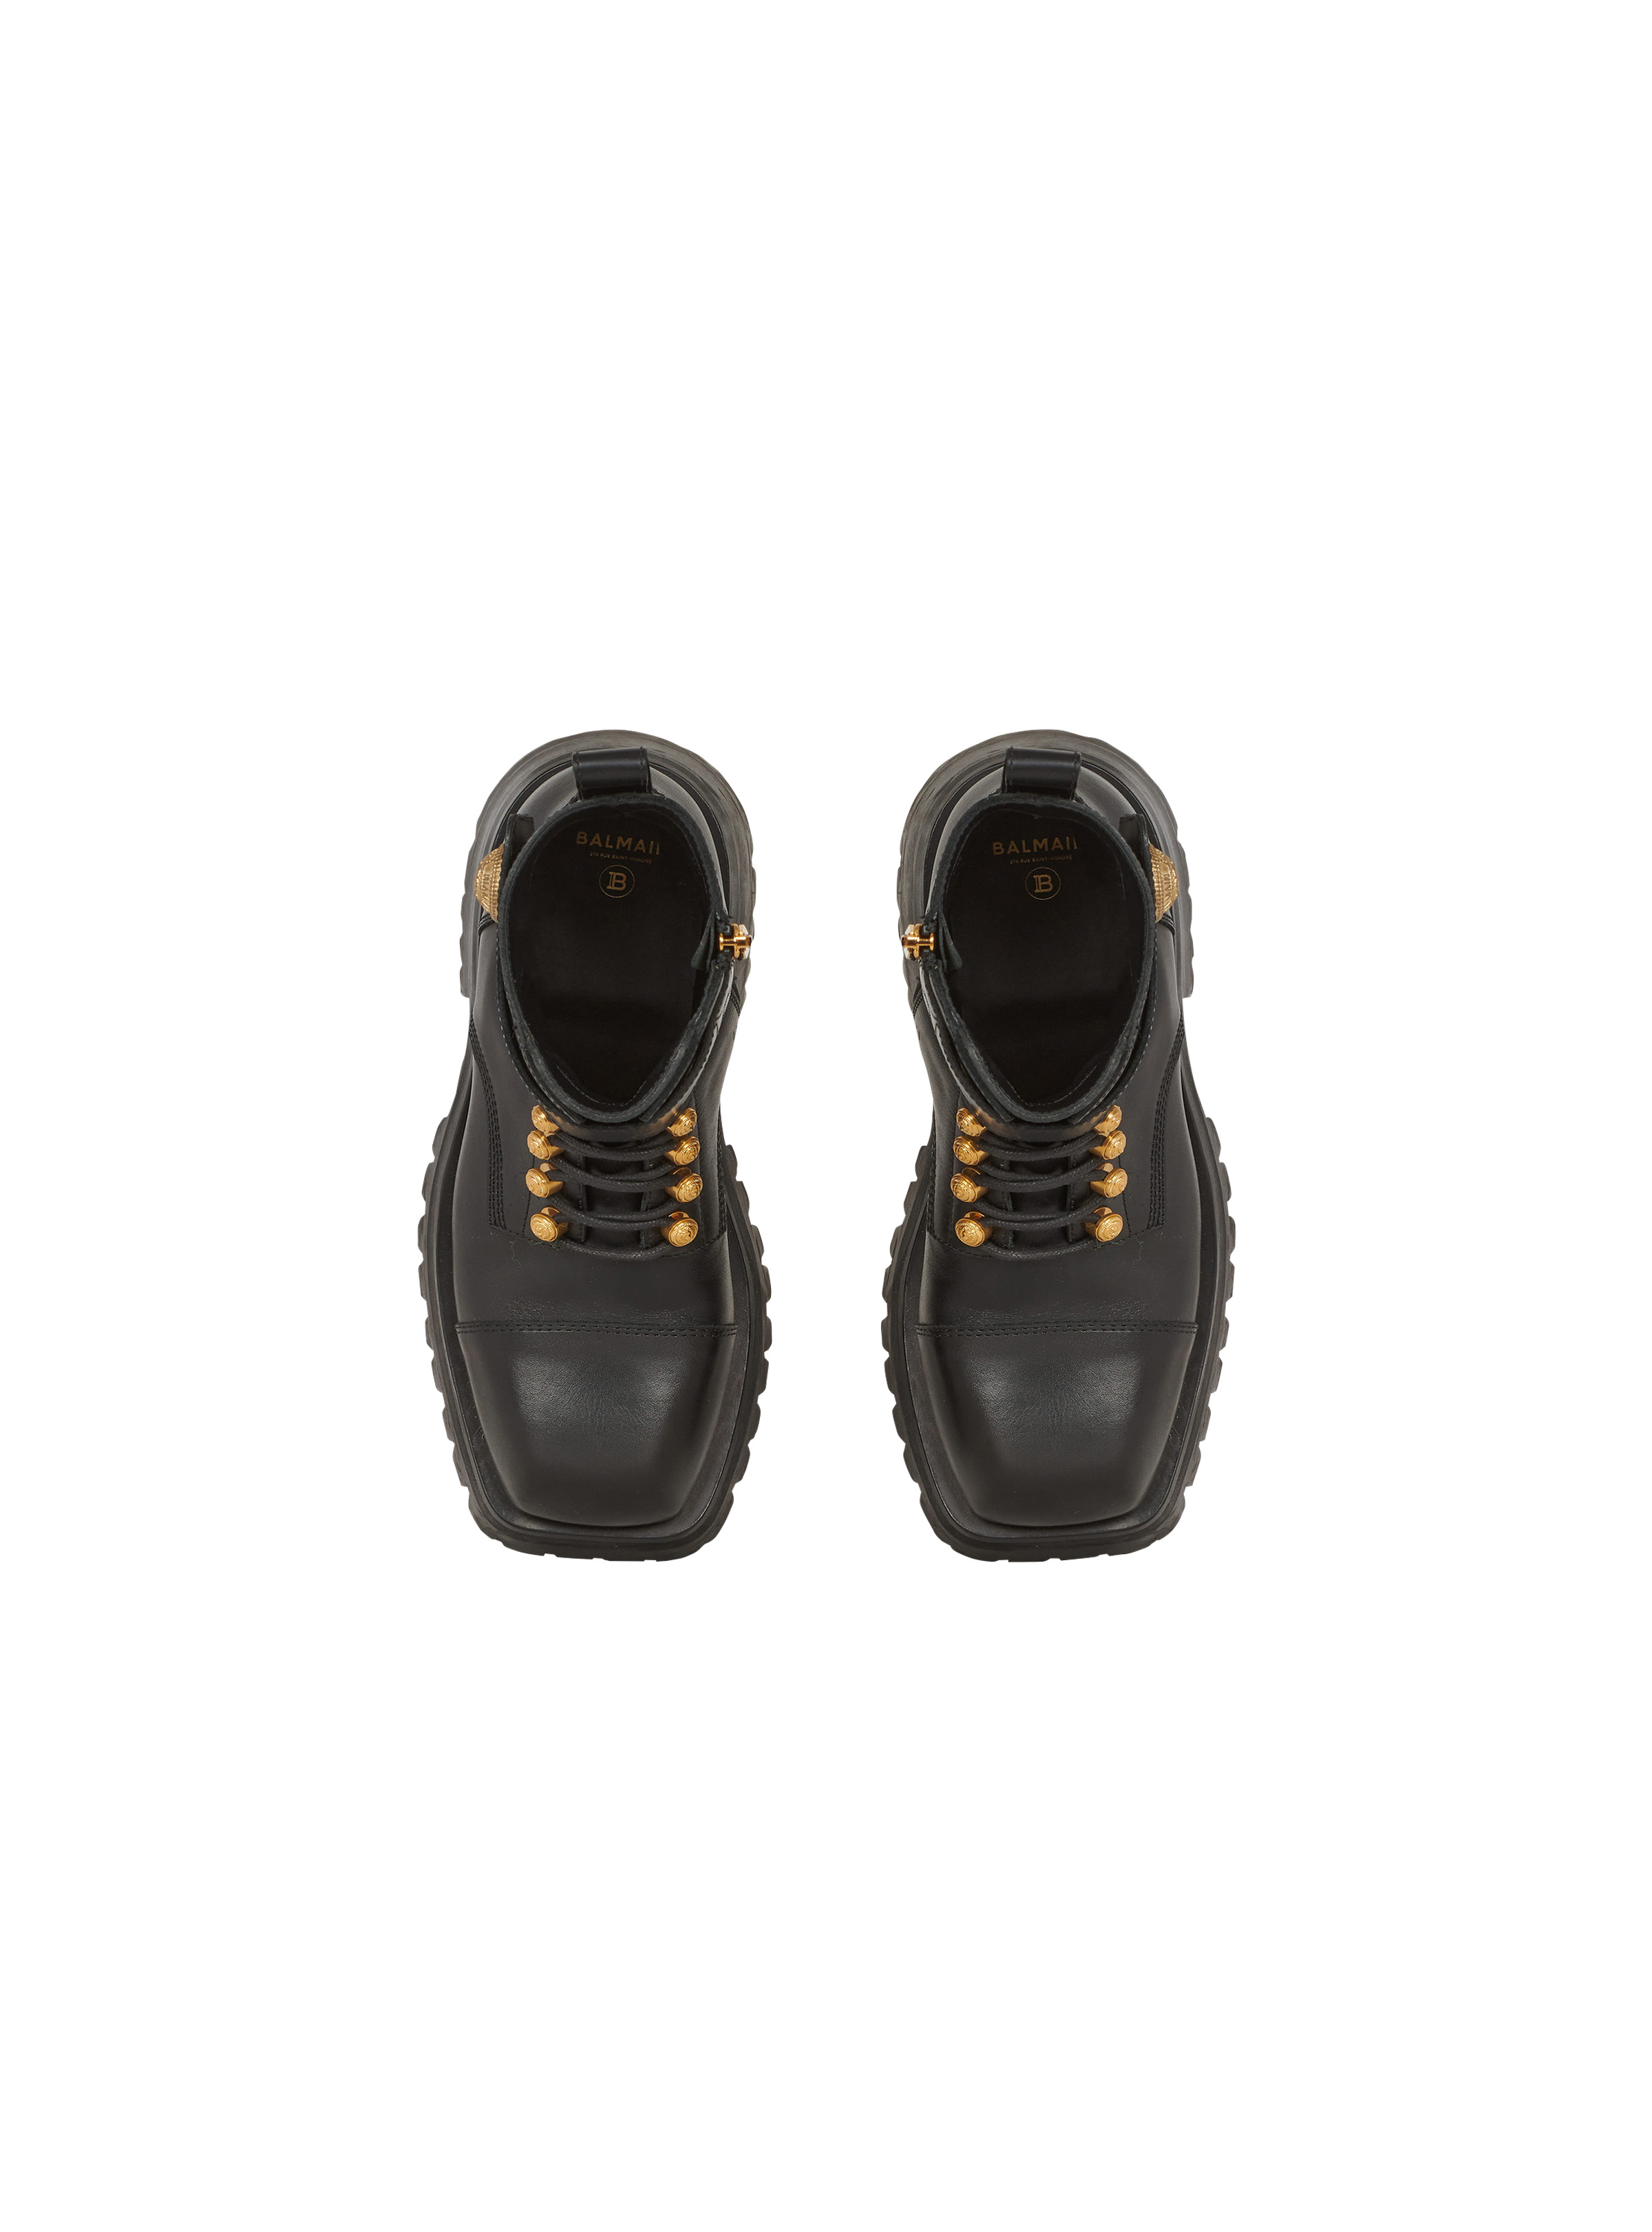 Ranger Army leather ankle boots - 3